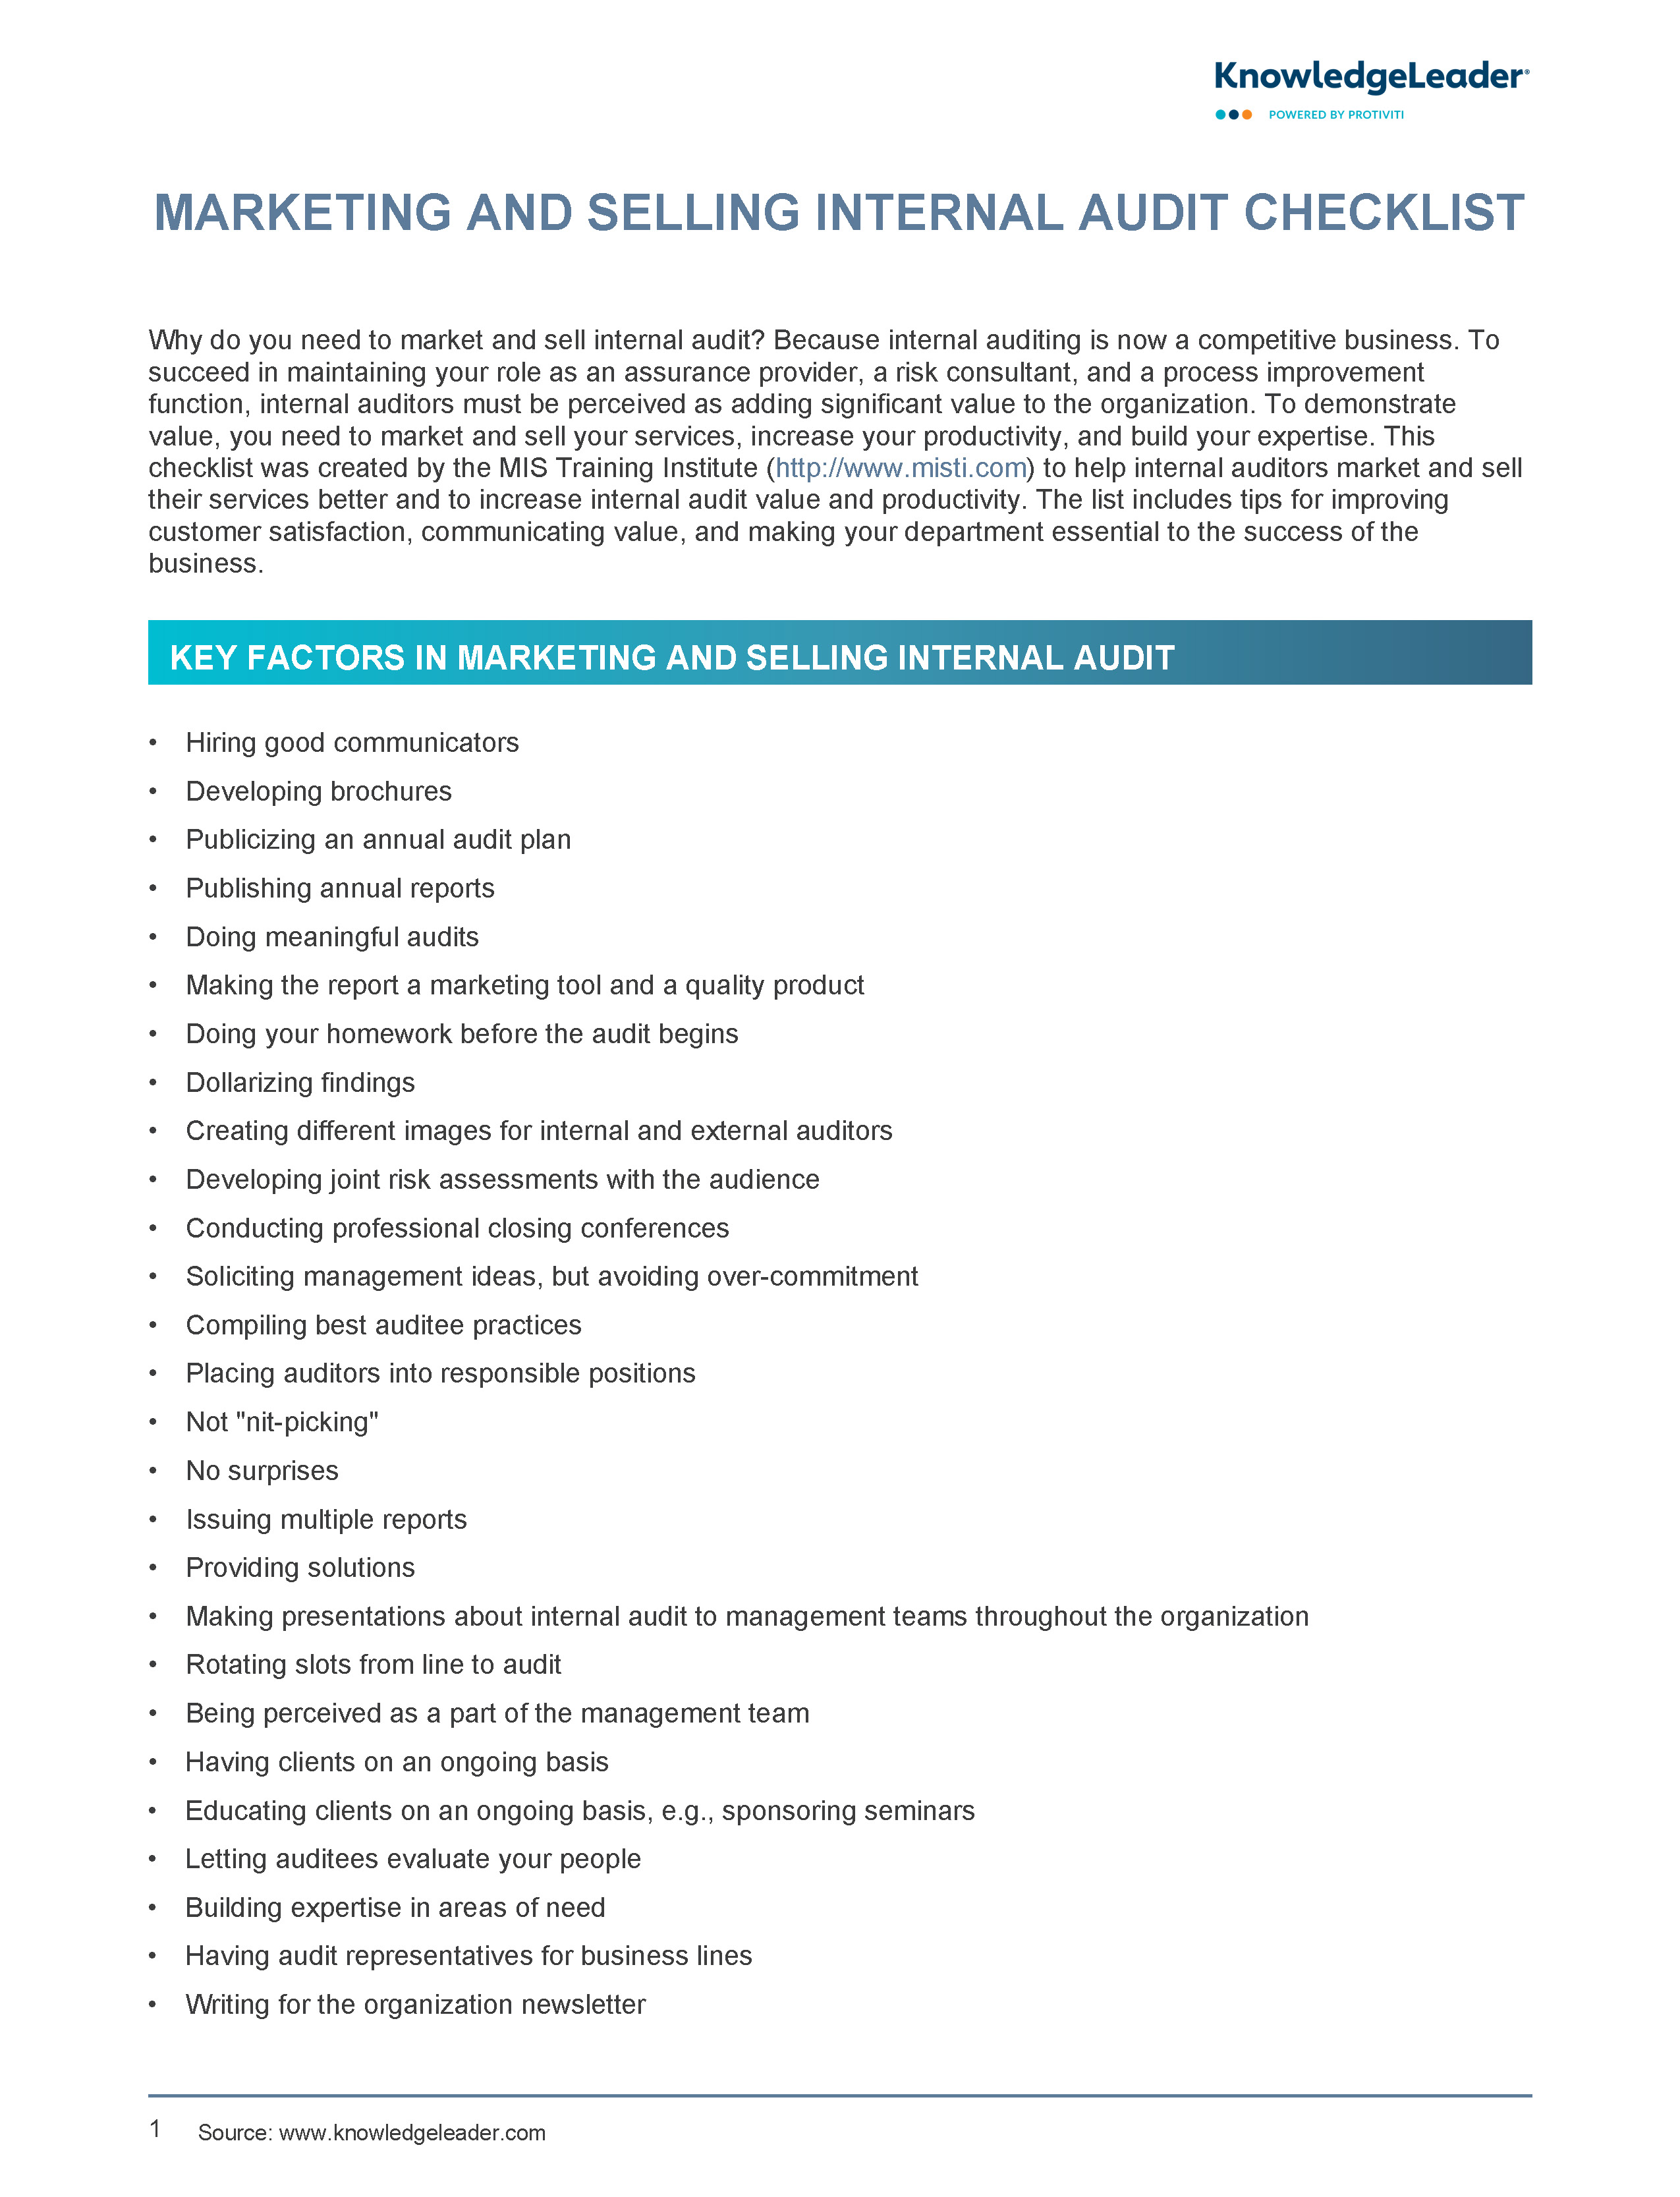 Screenshot of the first page of Marketing and Selling Internal Audit Checklist